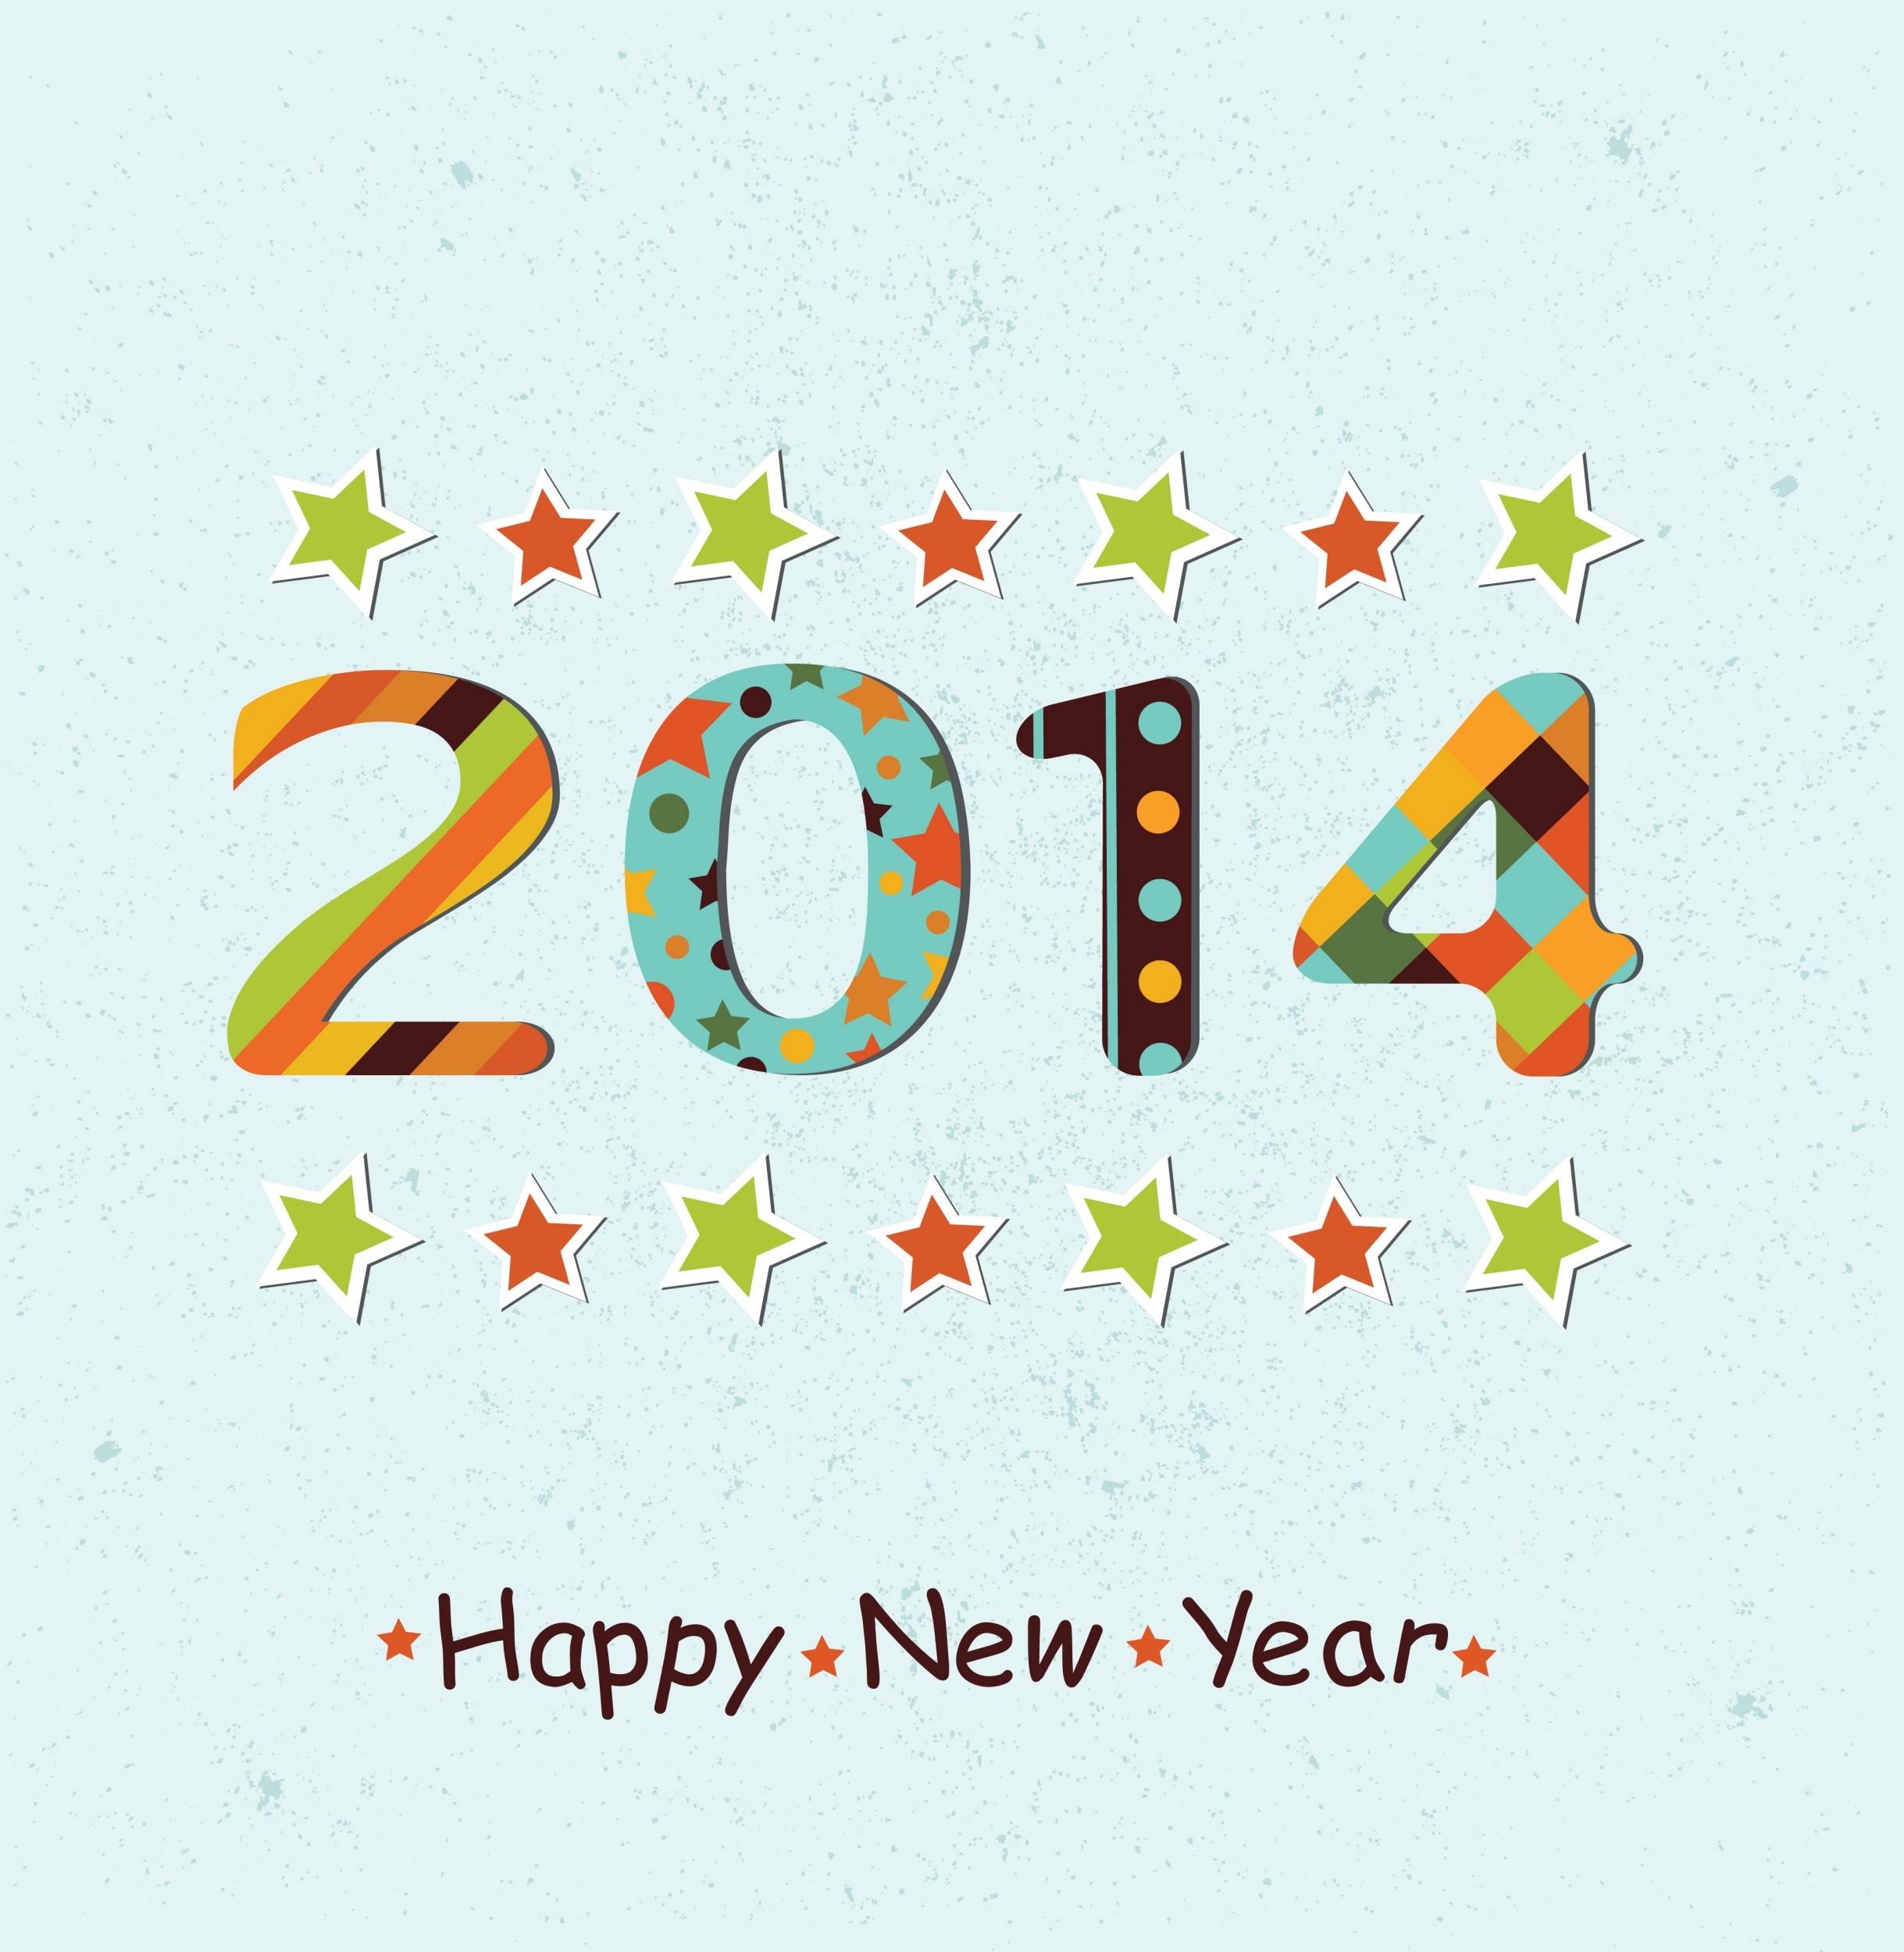 Christian Happy New Year Clip Art 2014 New Year Hd Wallpapers